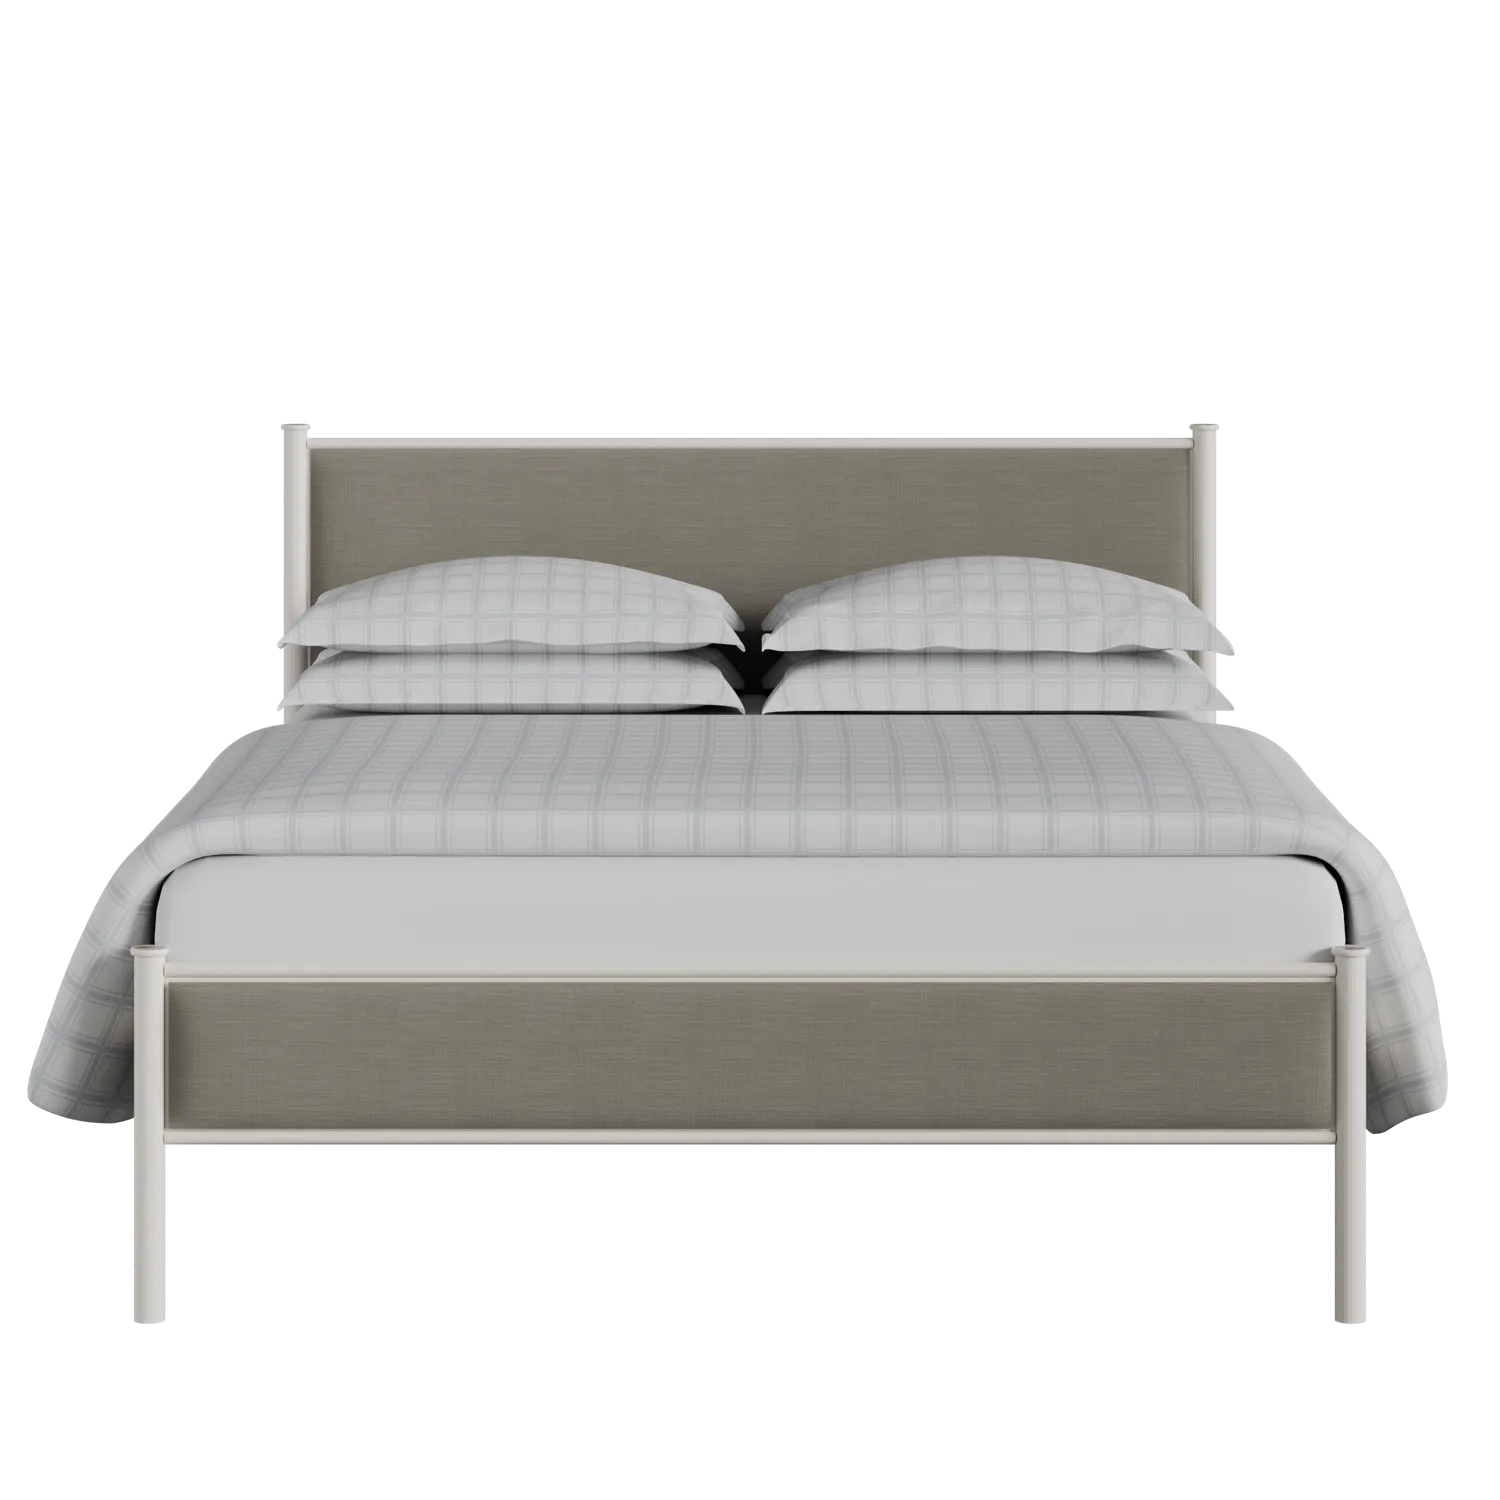 Brest iron/metal upholstered bed in ivory with grey fabric